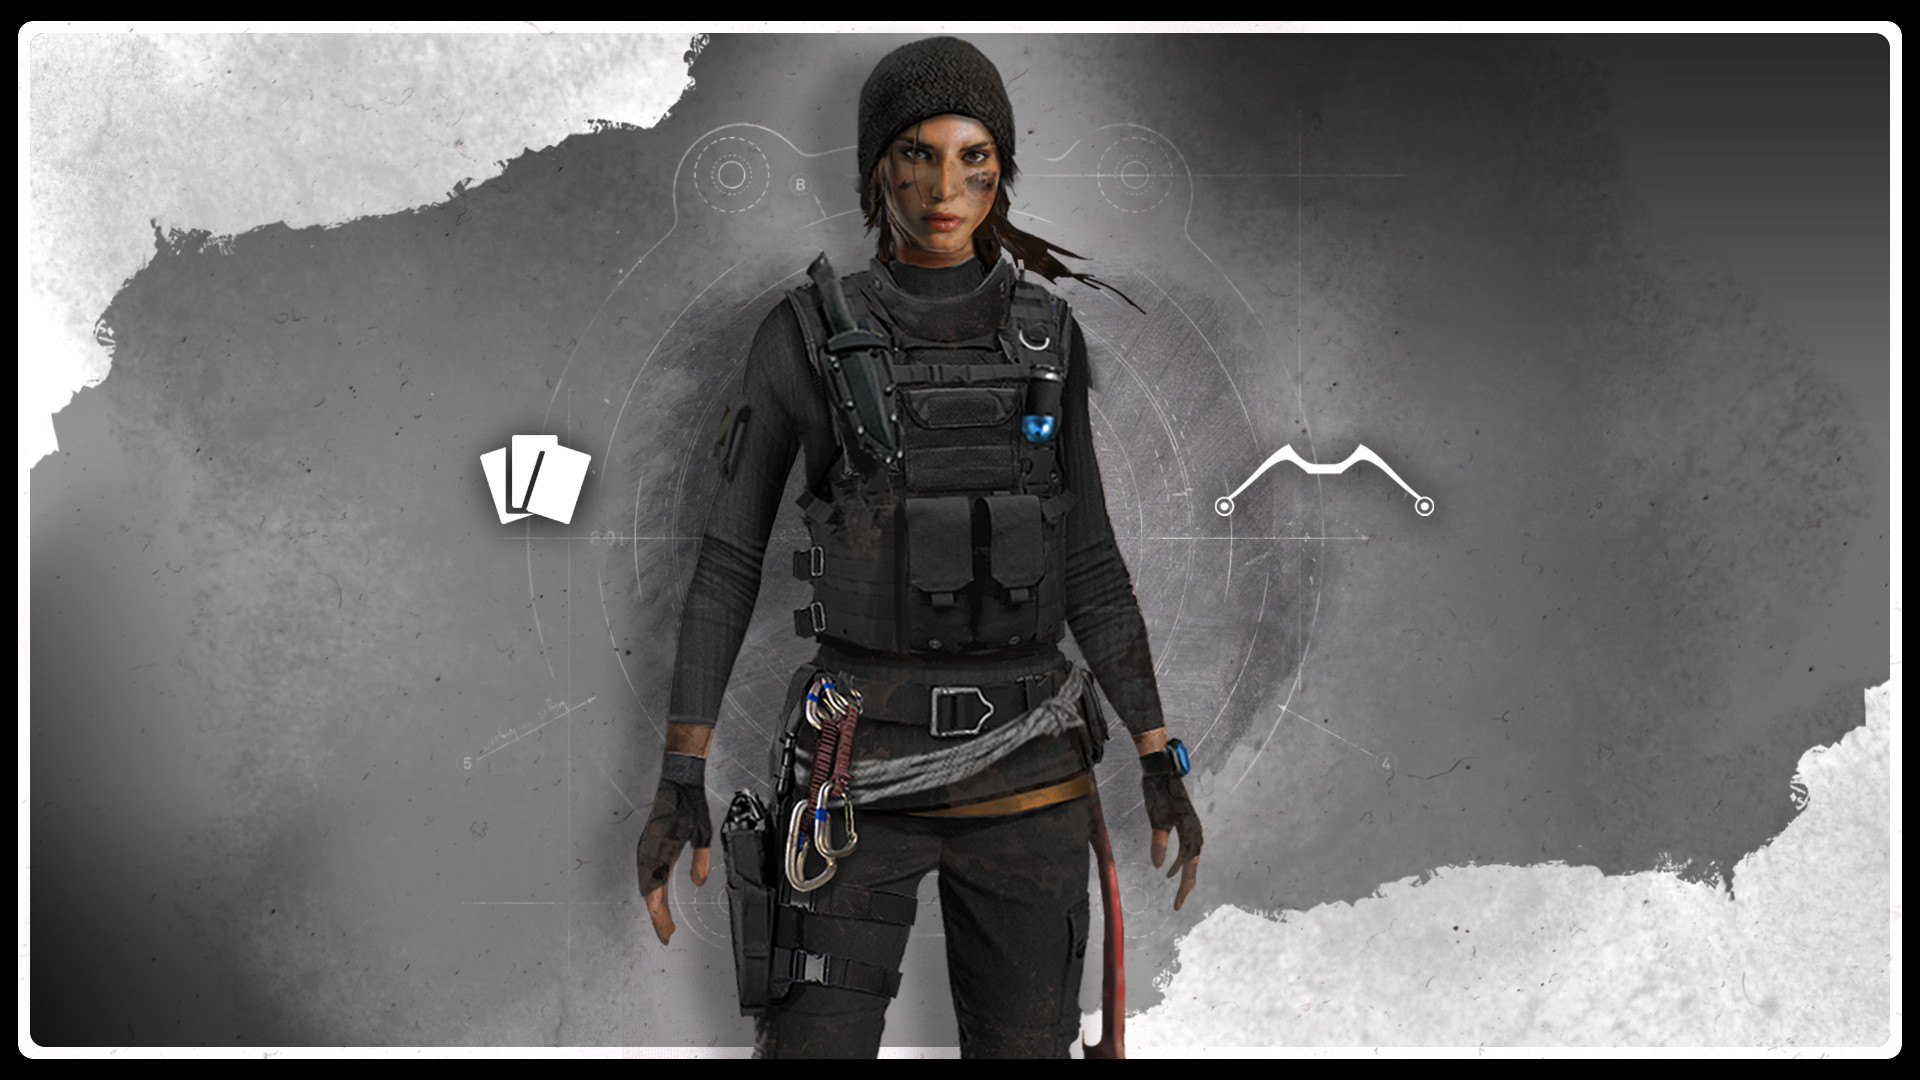 [$ 2.93] Rise of the Tomb Raider - Tactical Survivor Outfit Pack DLC Steam CD Key